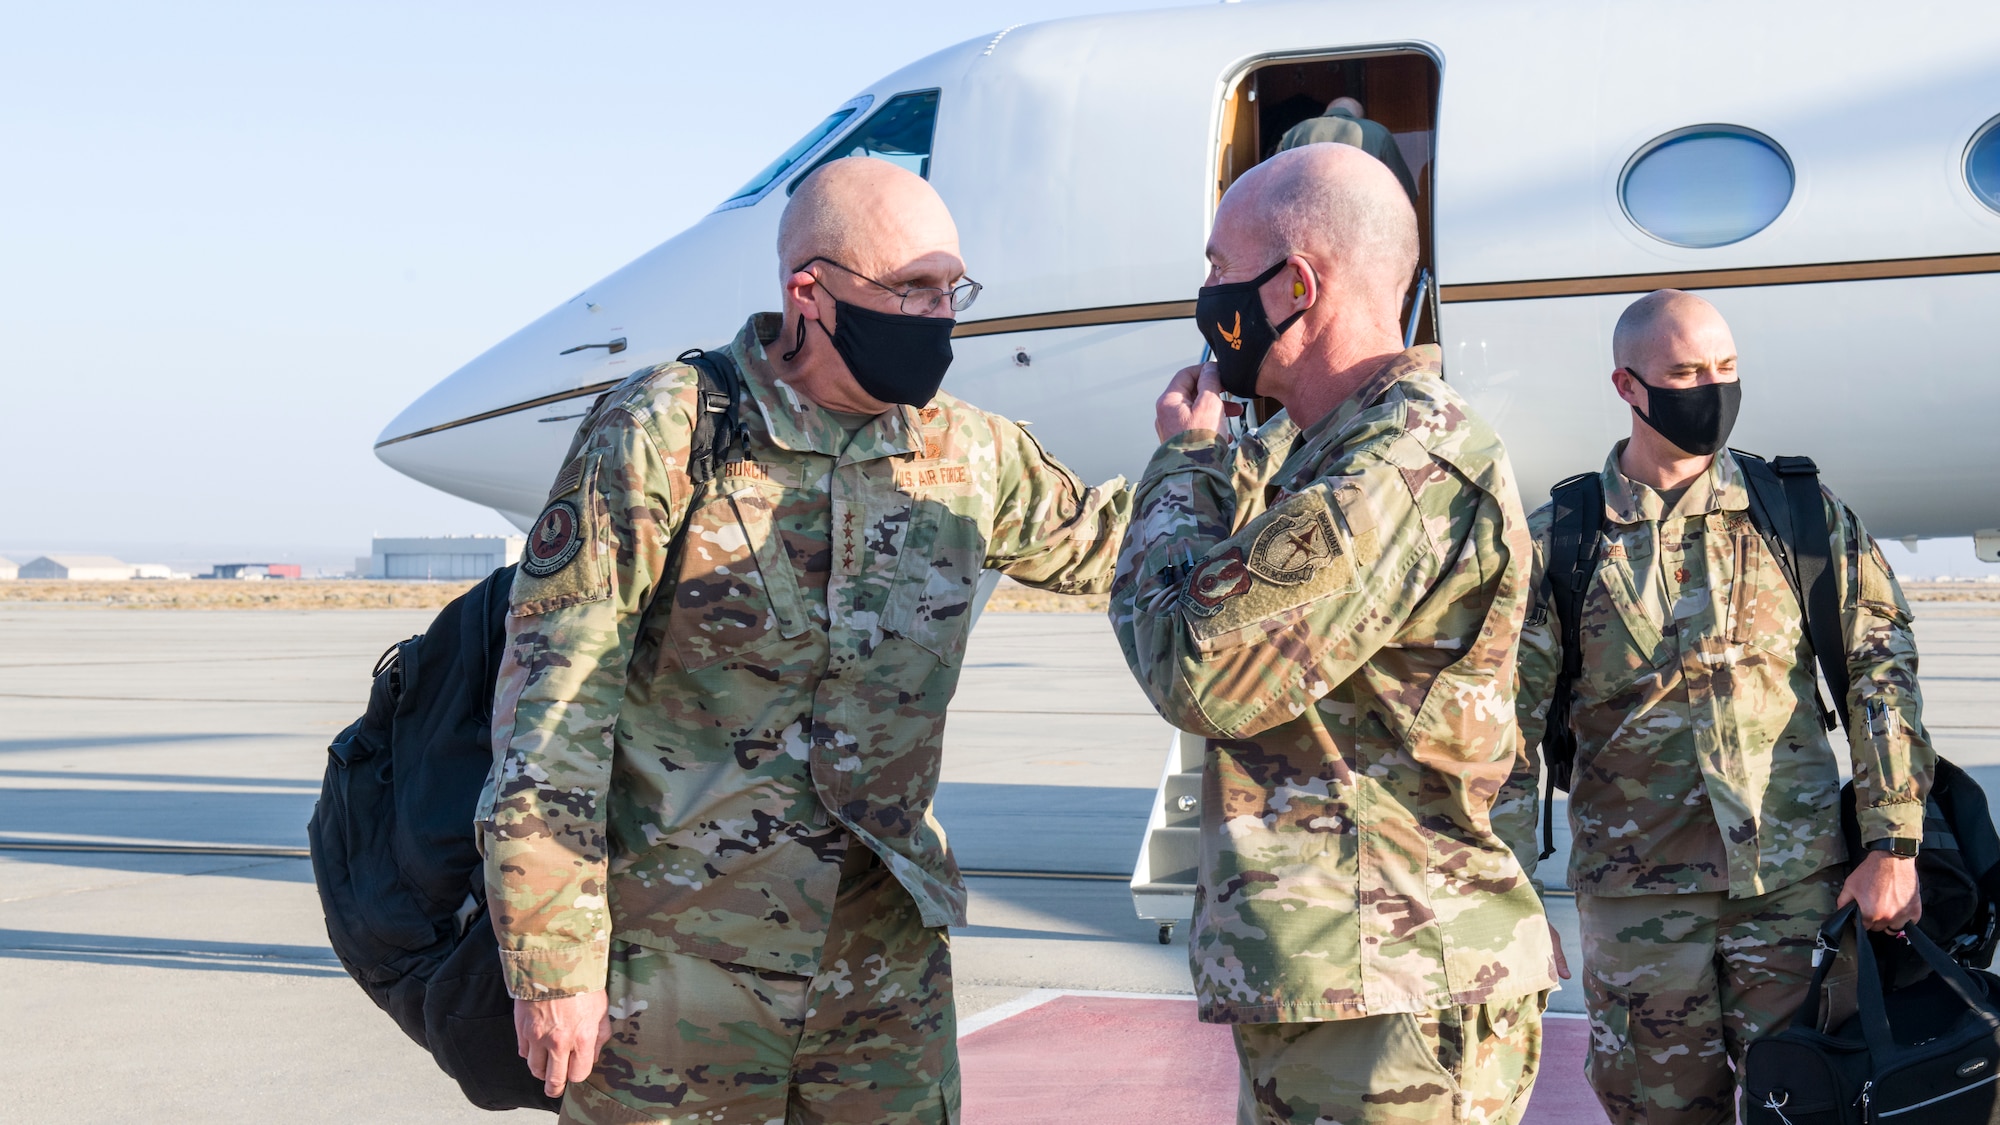 Gen. Arnold W. Bunch, Jr., commander of Air Force Materiel Command, converses with Maj. Gen. Christopher Azzano, Air Force Test Center commander, as he arrives at Edwards Air Force Base, California, Oct. 23. (Air Force photo by Giancarlo Casem)